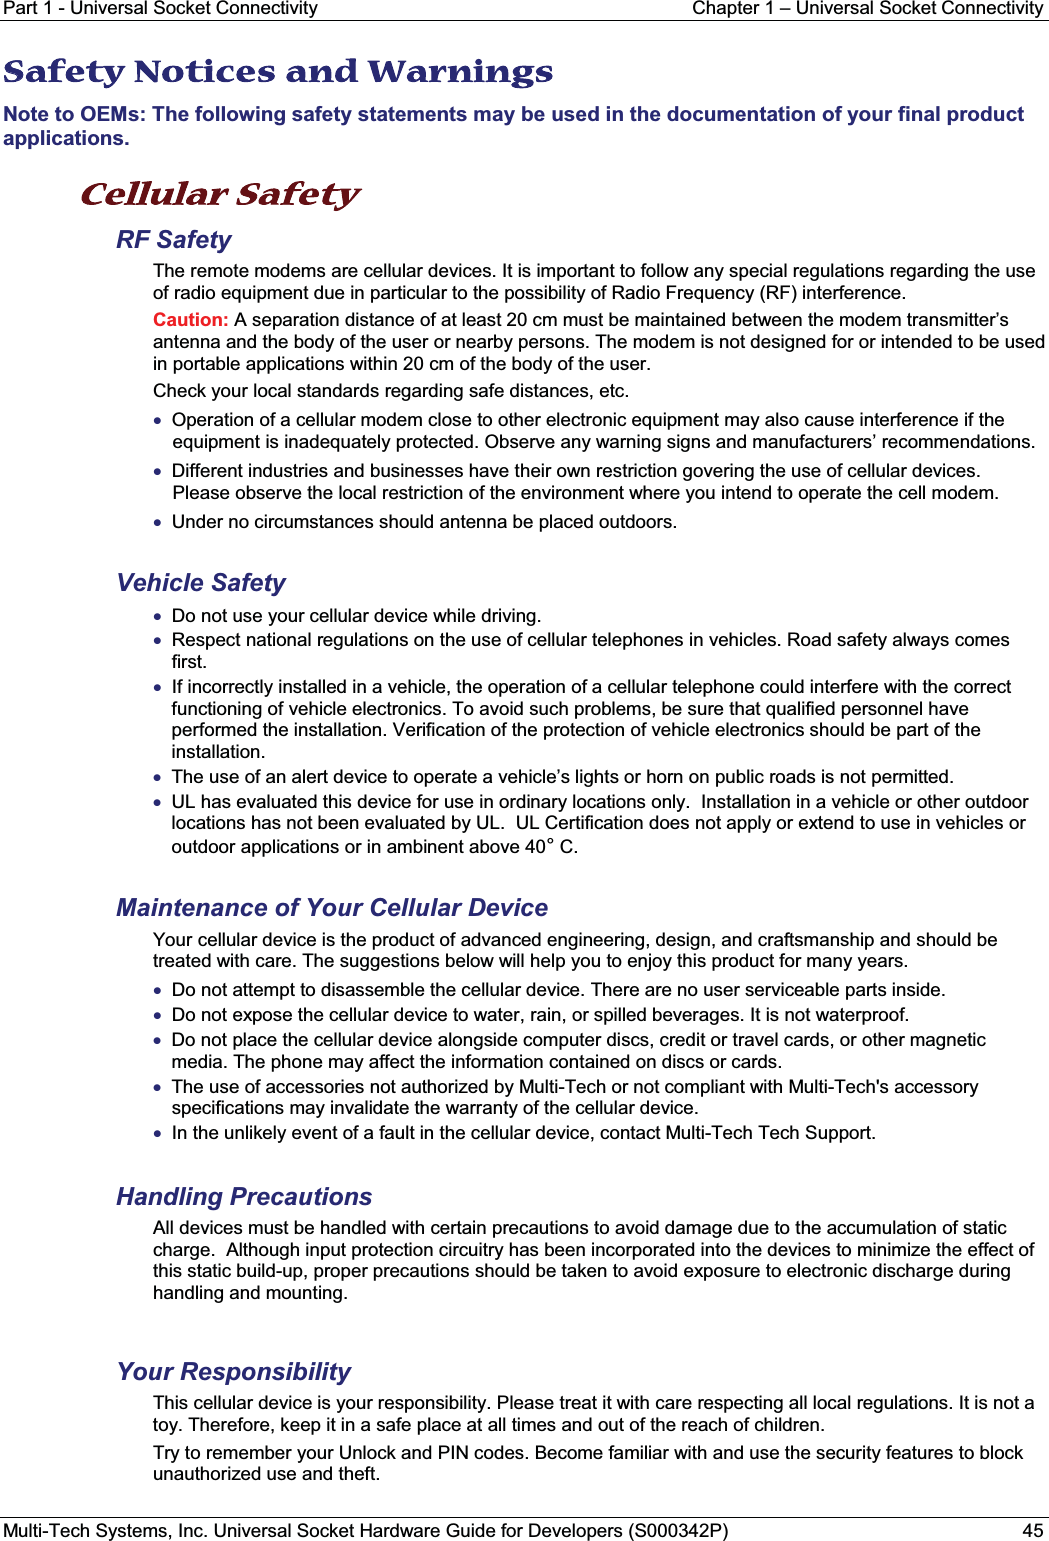 Part 1 - Universal Socket Connectivity Chapter 1 – Universal Socket ConnectivityMulti-Tech Systems, Inc. Universal Socket Hardware Guide for Developers (S000342P) 45SSafety Notices and Warnings Note to OEMs: The following safety statements may be used in the documentation of your final product applications.Cellular Safety  RF SafetyThe remote modems are cellular devices. It is important to follow any special regulations regarding the use of radio equipment due in particular to the possibility of Radio Frequency (RF) interference.Caution: A separation distance of at least 20 cm must be maintained between the modem transmitter’s antenna and the body of the user or nearby persons. The modem is not designed for or intended to be used in portable applications within 20 cm of the body of the user. Check your local standards regarding safe distances, etc.xOperation of a cellular modem close to other electronic equipment may also cause interference if the equipment is inadequately protected. Observe any warning signs and manufacturers’ recommendations.xDifferent industries and businesses have their own restriction govering the use of cellular devices.Please observe the local restriction of the environment where you intend to operate the cell modem.xUnder no circumstances should antenna be placed outdoors.Vehicle SafetyxDo not use your cellular device while driving.xRespect national regulations on the use of cellular telephones in vehicles. Road safety always comes first.xIf incorrectly installed in a vehicle, the operation of a cellular telephone could interfere with the correct functioning of vehicle electronics. To avoid such problems, be sure that qualified personnel have performed the installation. Verification of the protection of vehicle electronics should be part of the installation.xThe use of an alert device to operate a vehicle’s lights or horn on public roads is not permitted.xUL has evaluated this device for use in ordinary locations only.  Installation in a vehicle or other outdoor locations has not been evaluated by UL.  UL Certification does not apply or extend to use in vehicles or outdoor applications or in ambinent above 40°C.Maintenance of Your Cellular DeviceYour cellular device is the product of advanced engineering, design, and craftsmanship and should be treated with care. The suggestions below will help you to enjoy this product for many years.xDo not attempt to disassemble the cellular device. There are no user serviceable parts inside.xDo not expose the cellular device to water, rain, or spilled beverages. It is not waterproof.xDo not place the cellular device alongside computer discs, credit or travel cards, or other magnetic media. The phone may affect the information contained on discs or cards.xThe use of accessories not authorized by Multi-Tech or not compliant with Multi-Tech&apos;s accessory specifications may invalidate the warranty of the cellular device.xIn the unlikely event of a fault in the cellular device, contact Multi-Tech Tech Support.Handling PrecautionsAll devices must be handled with certain precautions to avoid damage due to the accumulation of static charge.  Although input protection circuitry has been incorporated into the devices to minimize the effect of this static build-up, proper precautions should be taken to avoid exposure to electronic discharge during handling and mounting.Your ResponsibilityThis cellular device is your responsibility. Please treat it with care respecting all local regulations. It is not a toy. Therefore, keep it in a safe place at all times and out of the reach of children.Try to remember your Unlock and PIN codes. Become familiar with and use the security features to block unauthorized use and theft.